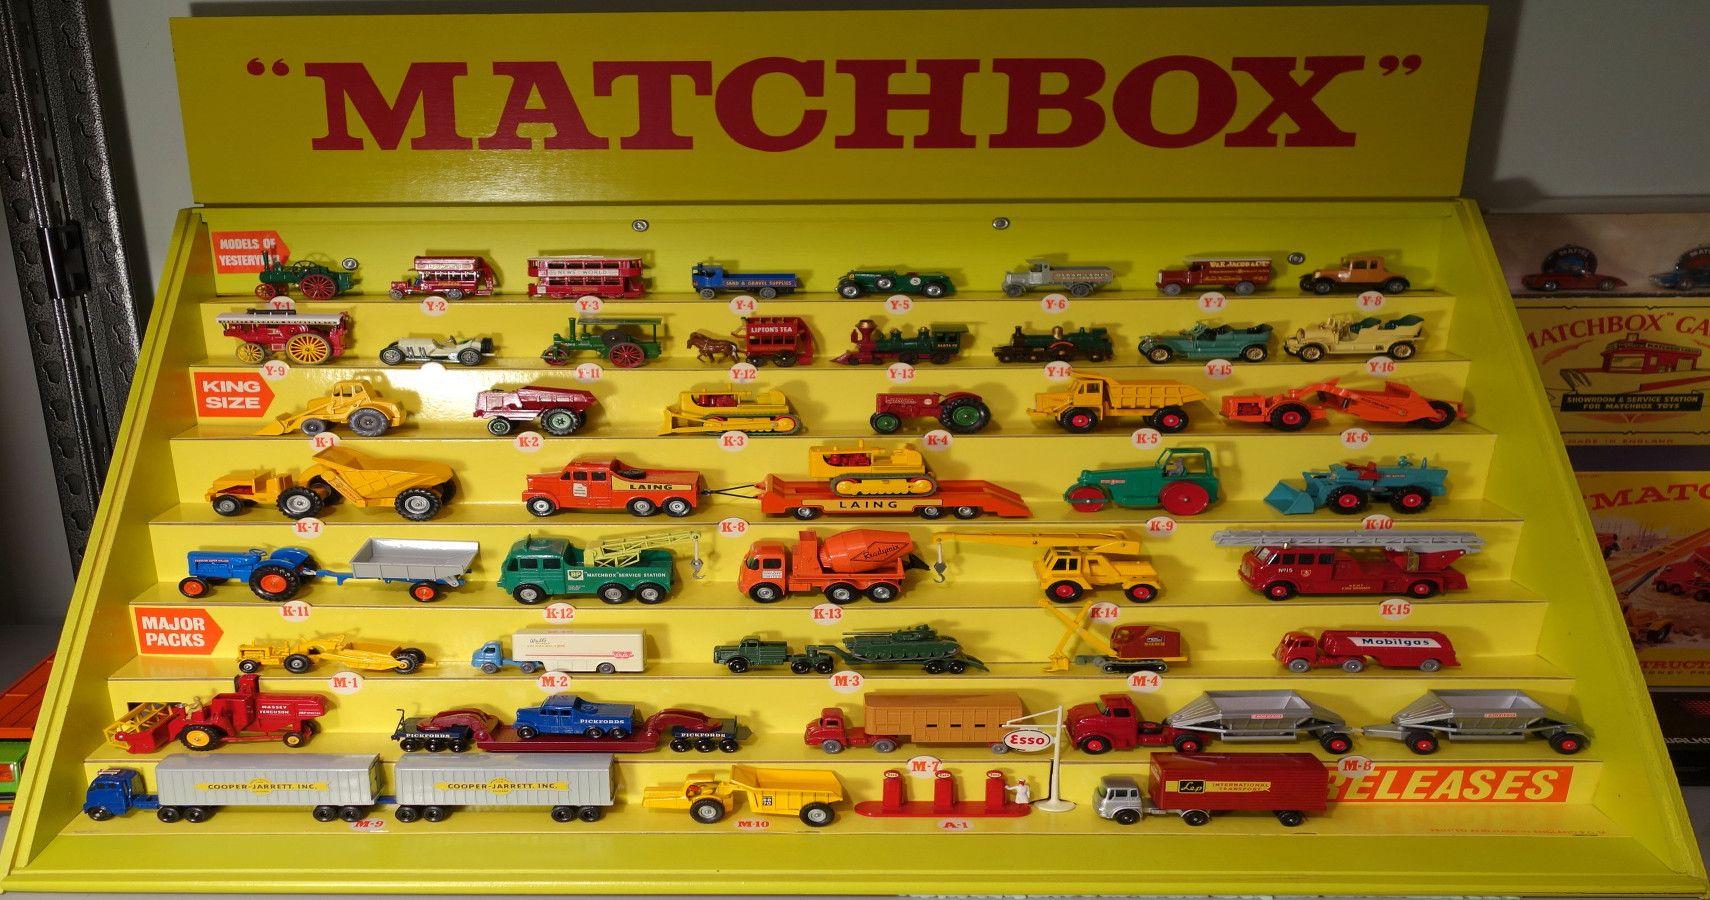 Matchbox Car Collection Sells For Almost 400,000